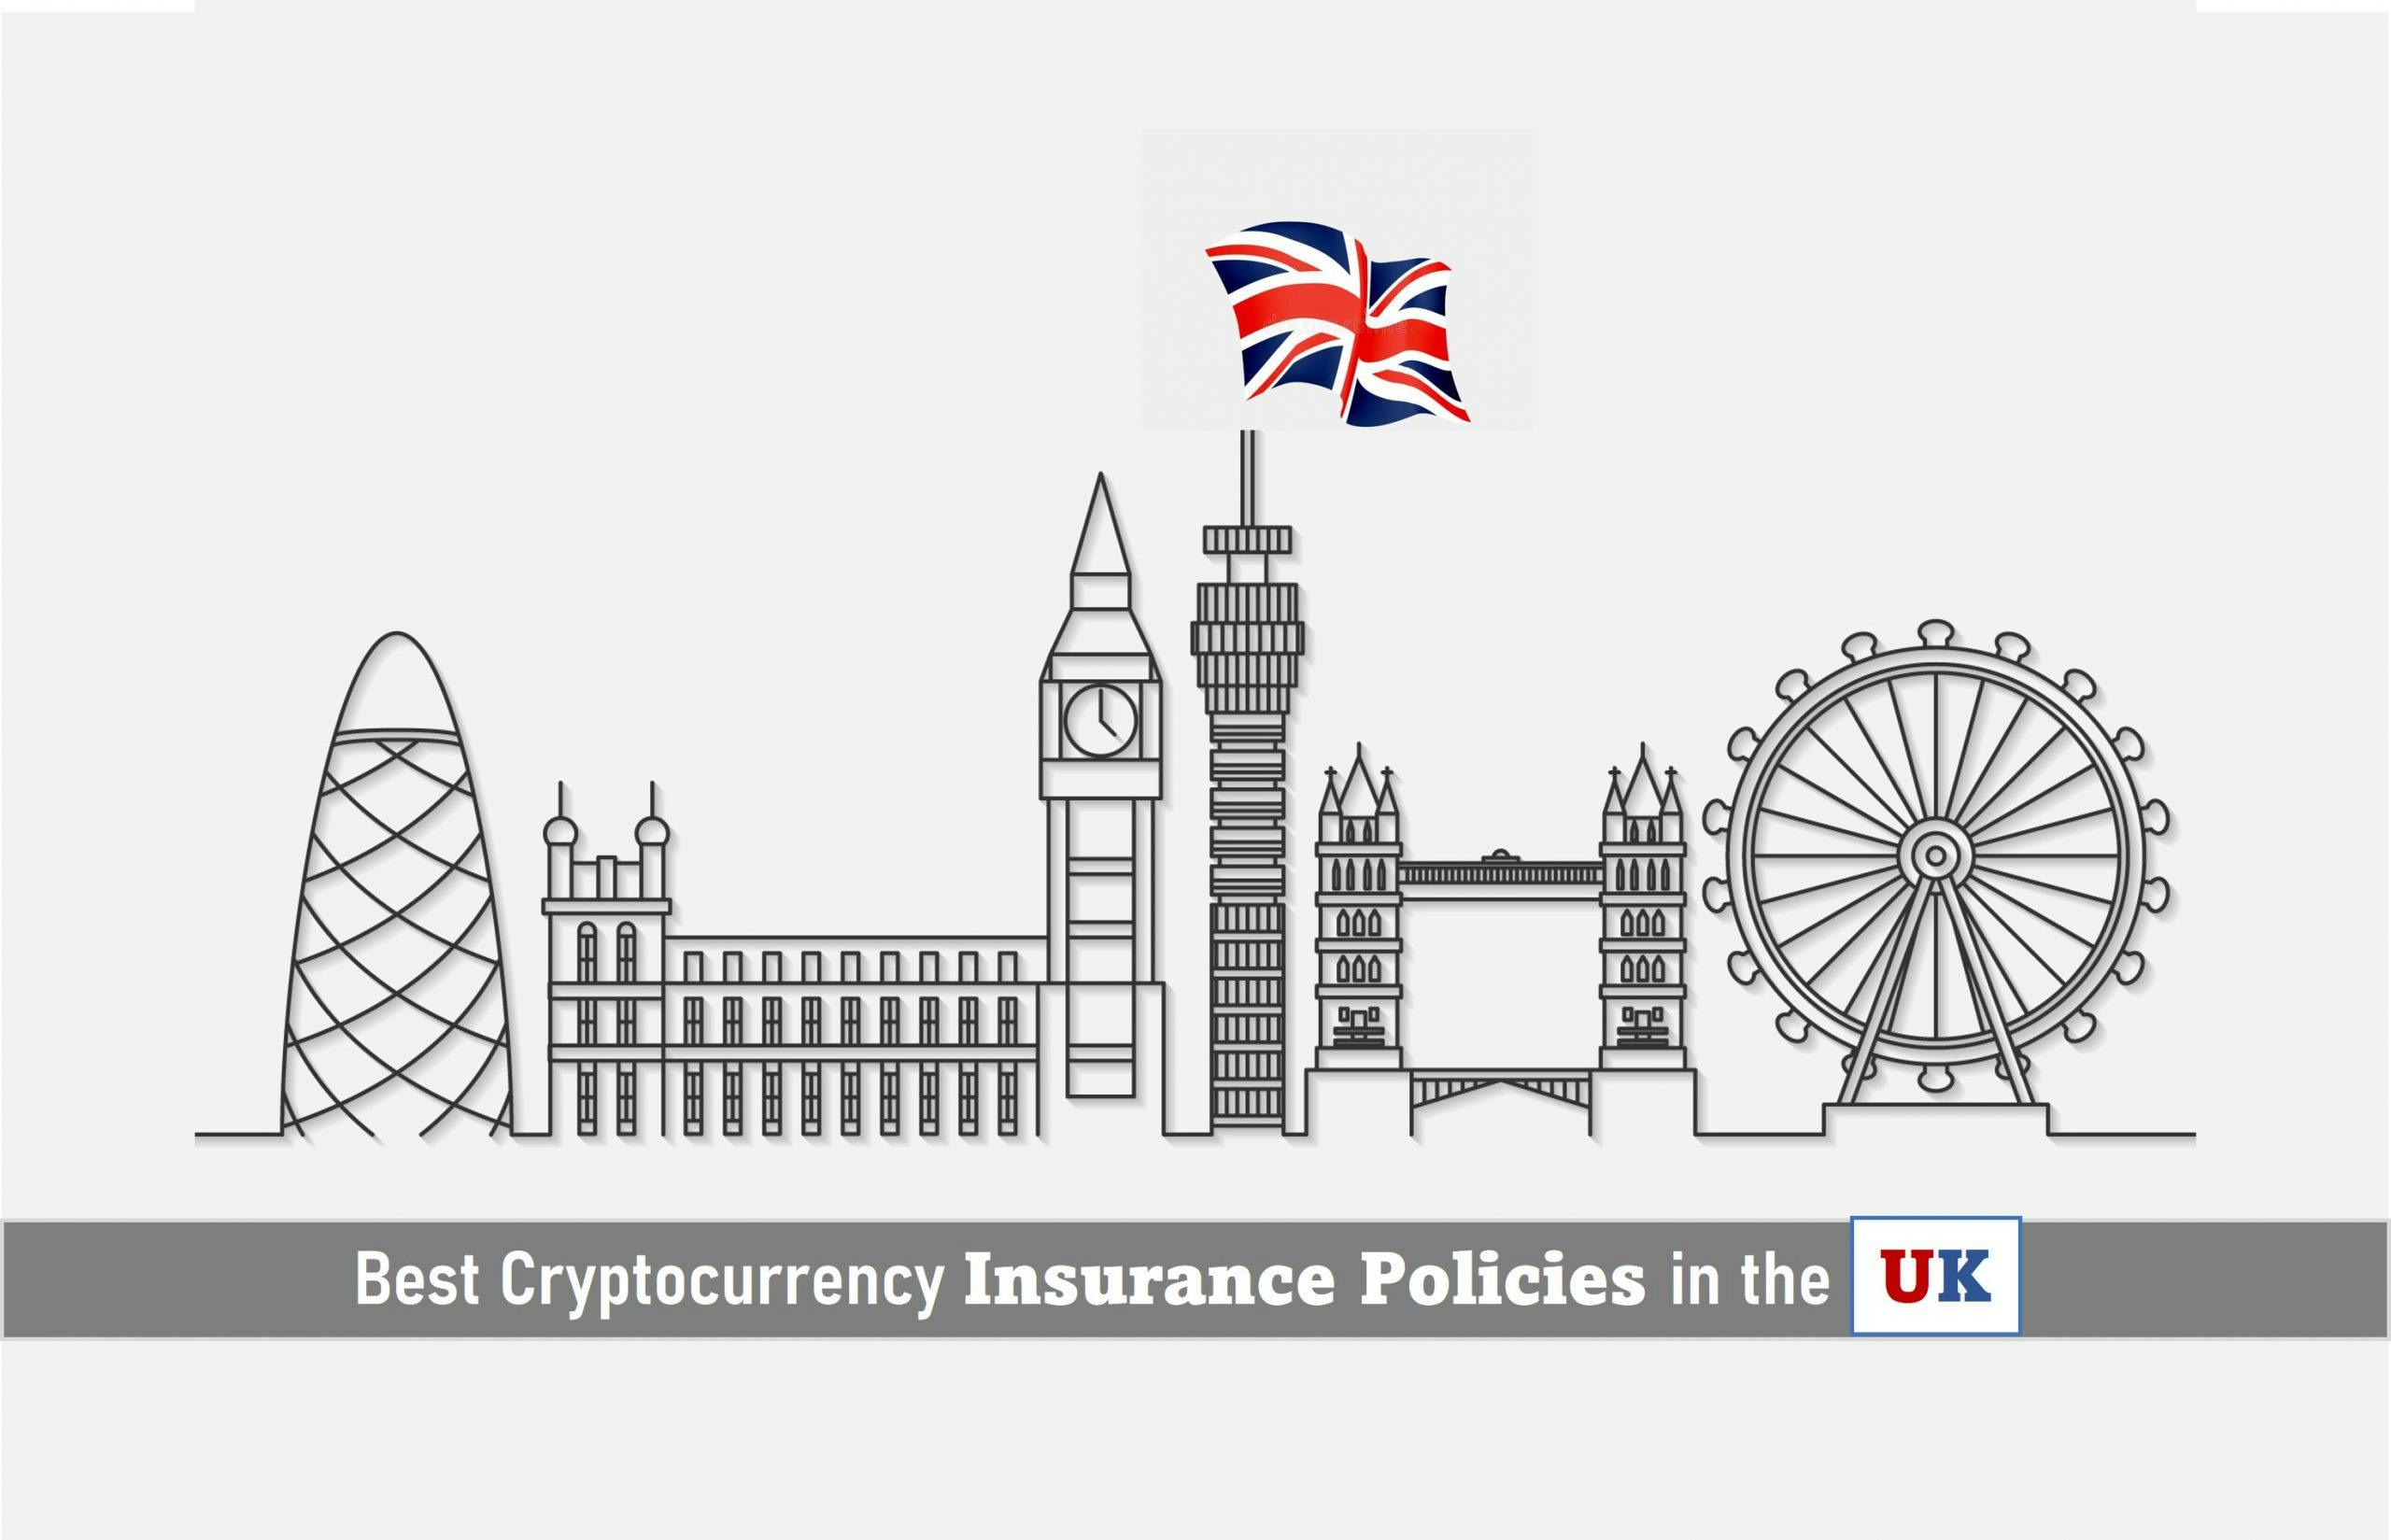 Best Cryptocurrency Insurance Policies in the UK